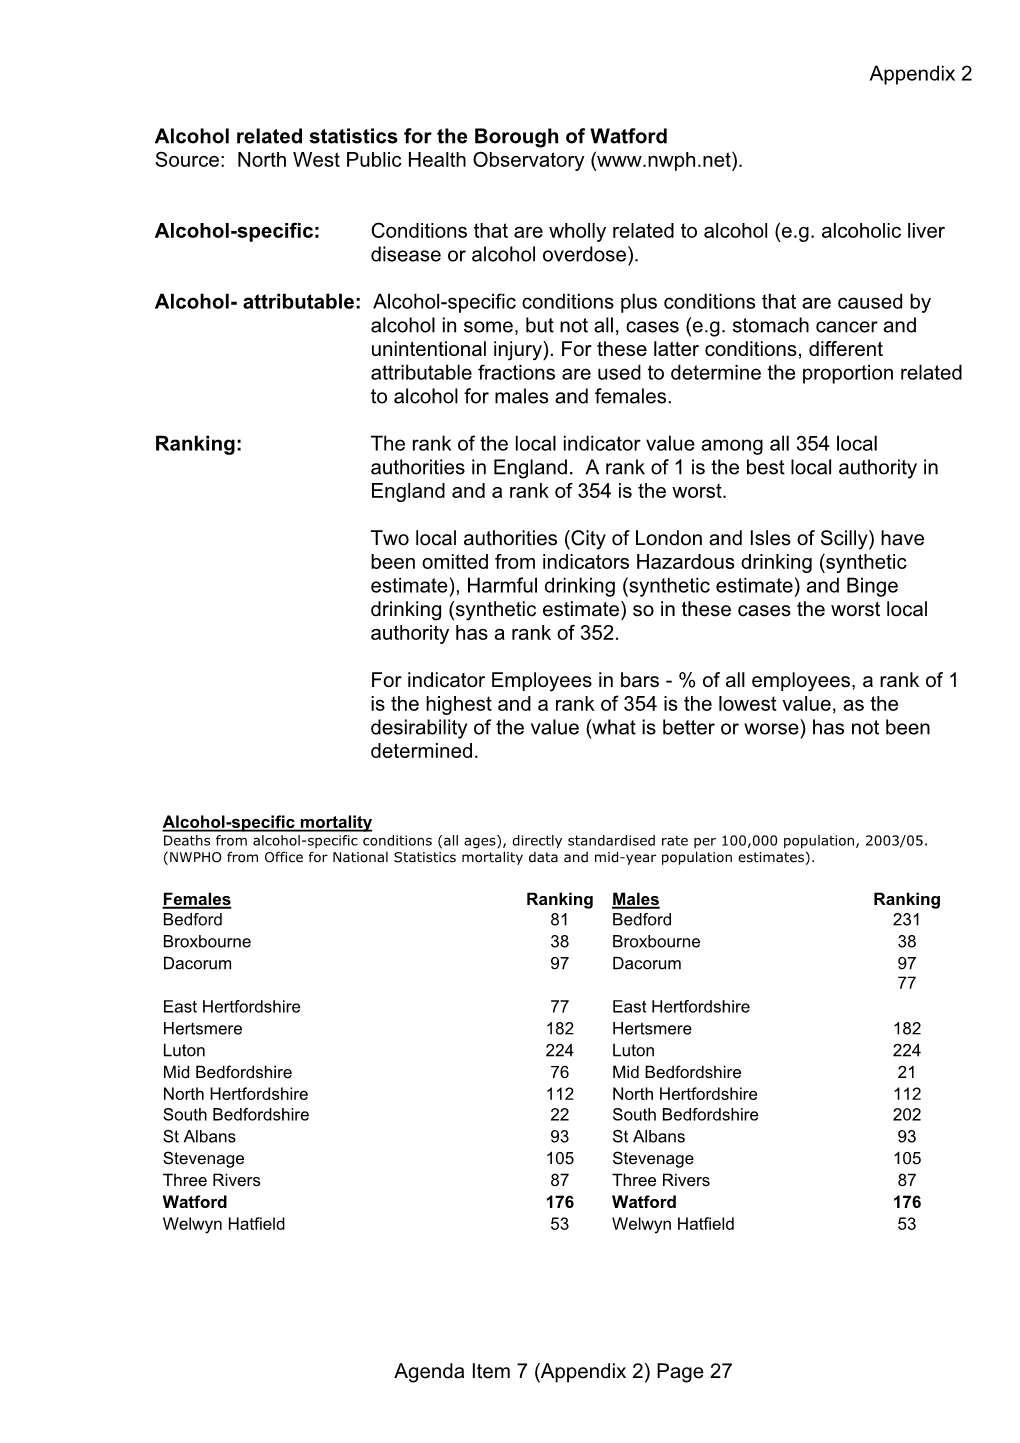 Appendix 2 Alcohol Related Statistics for the Borough of Watford Source